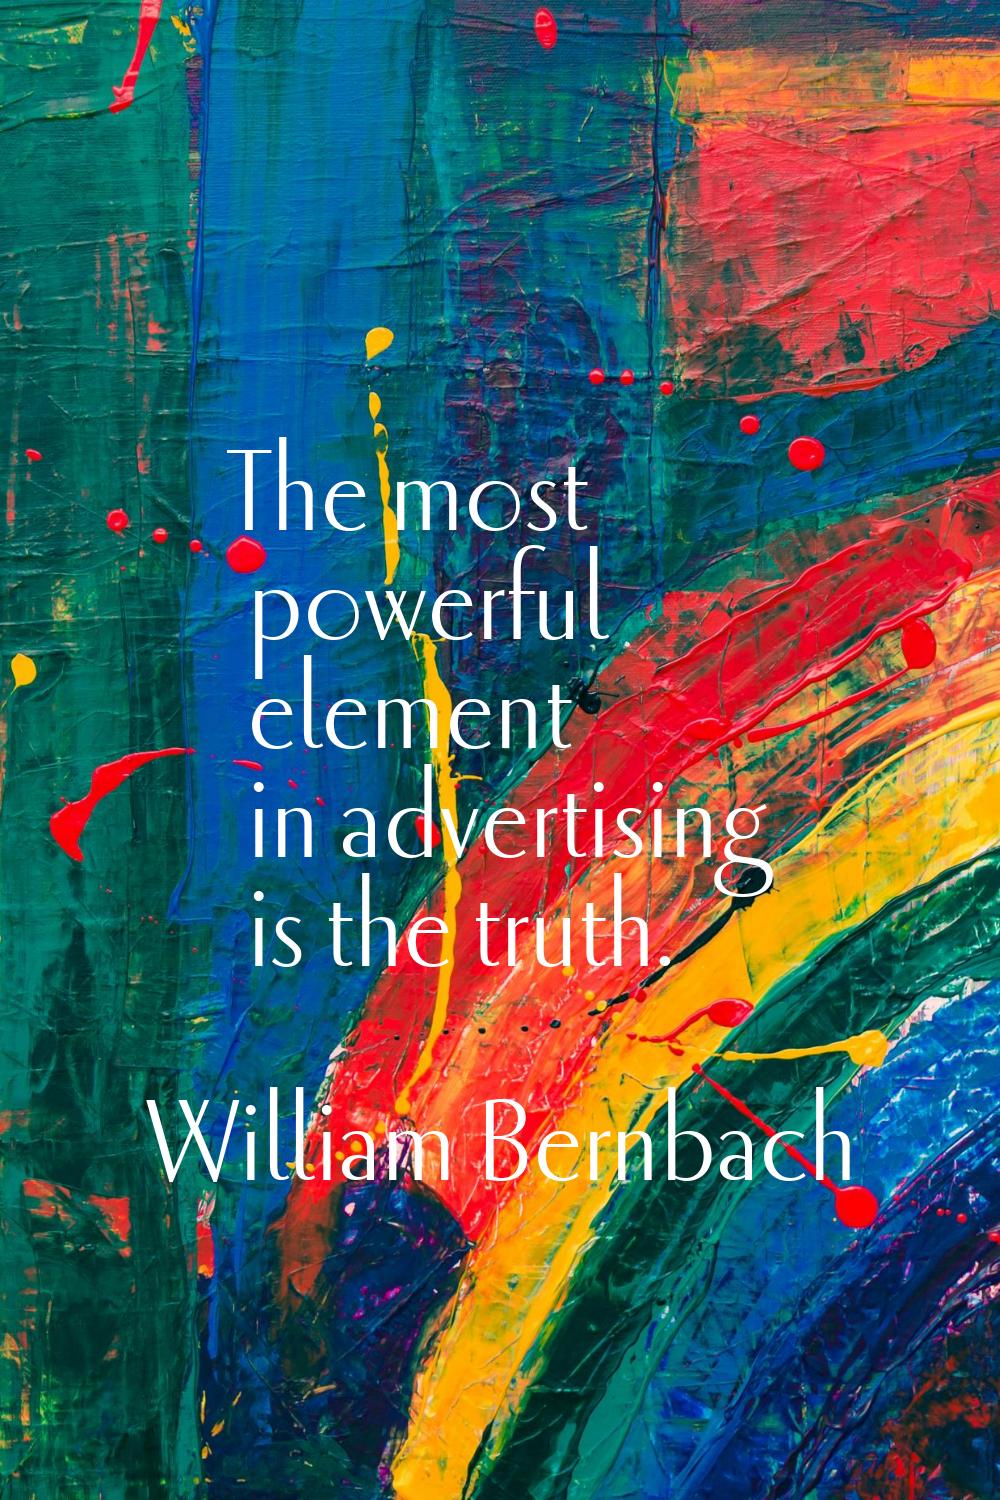 The most powerful element in advertising is the truth.